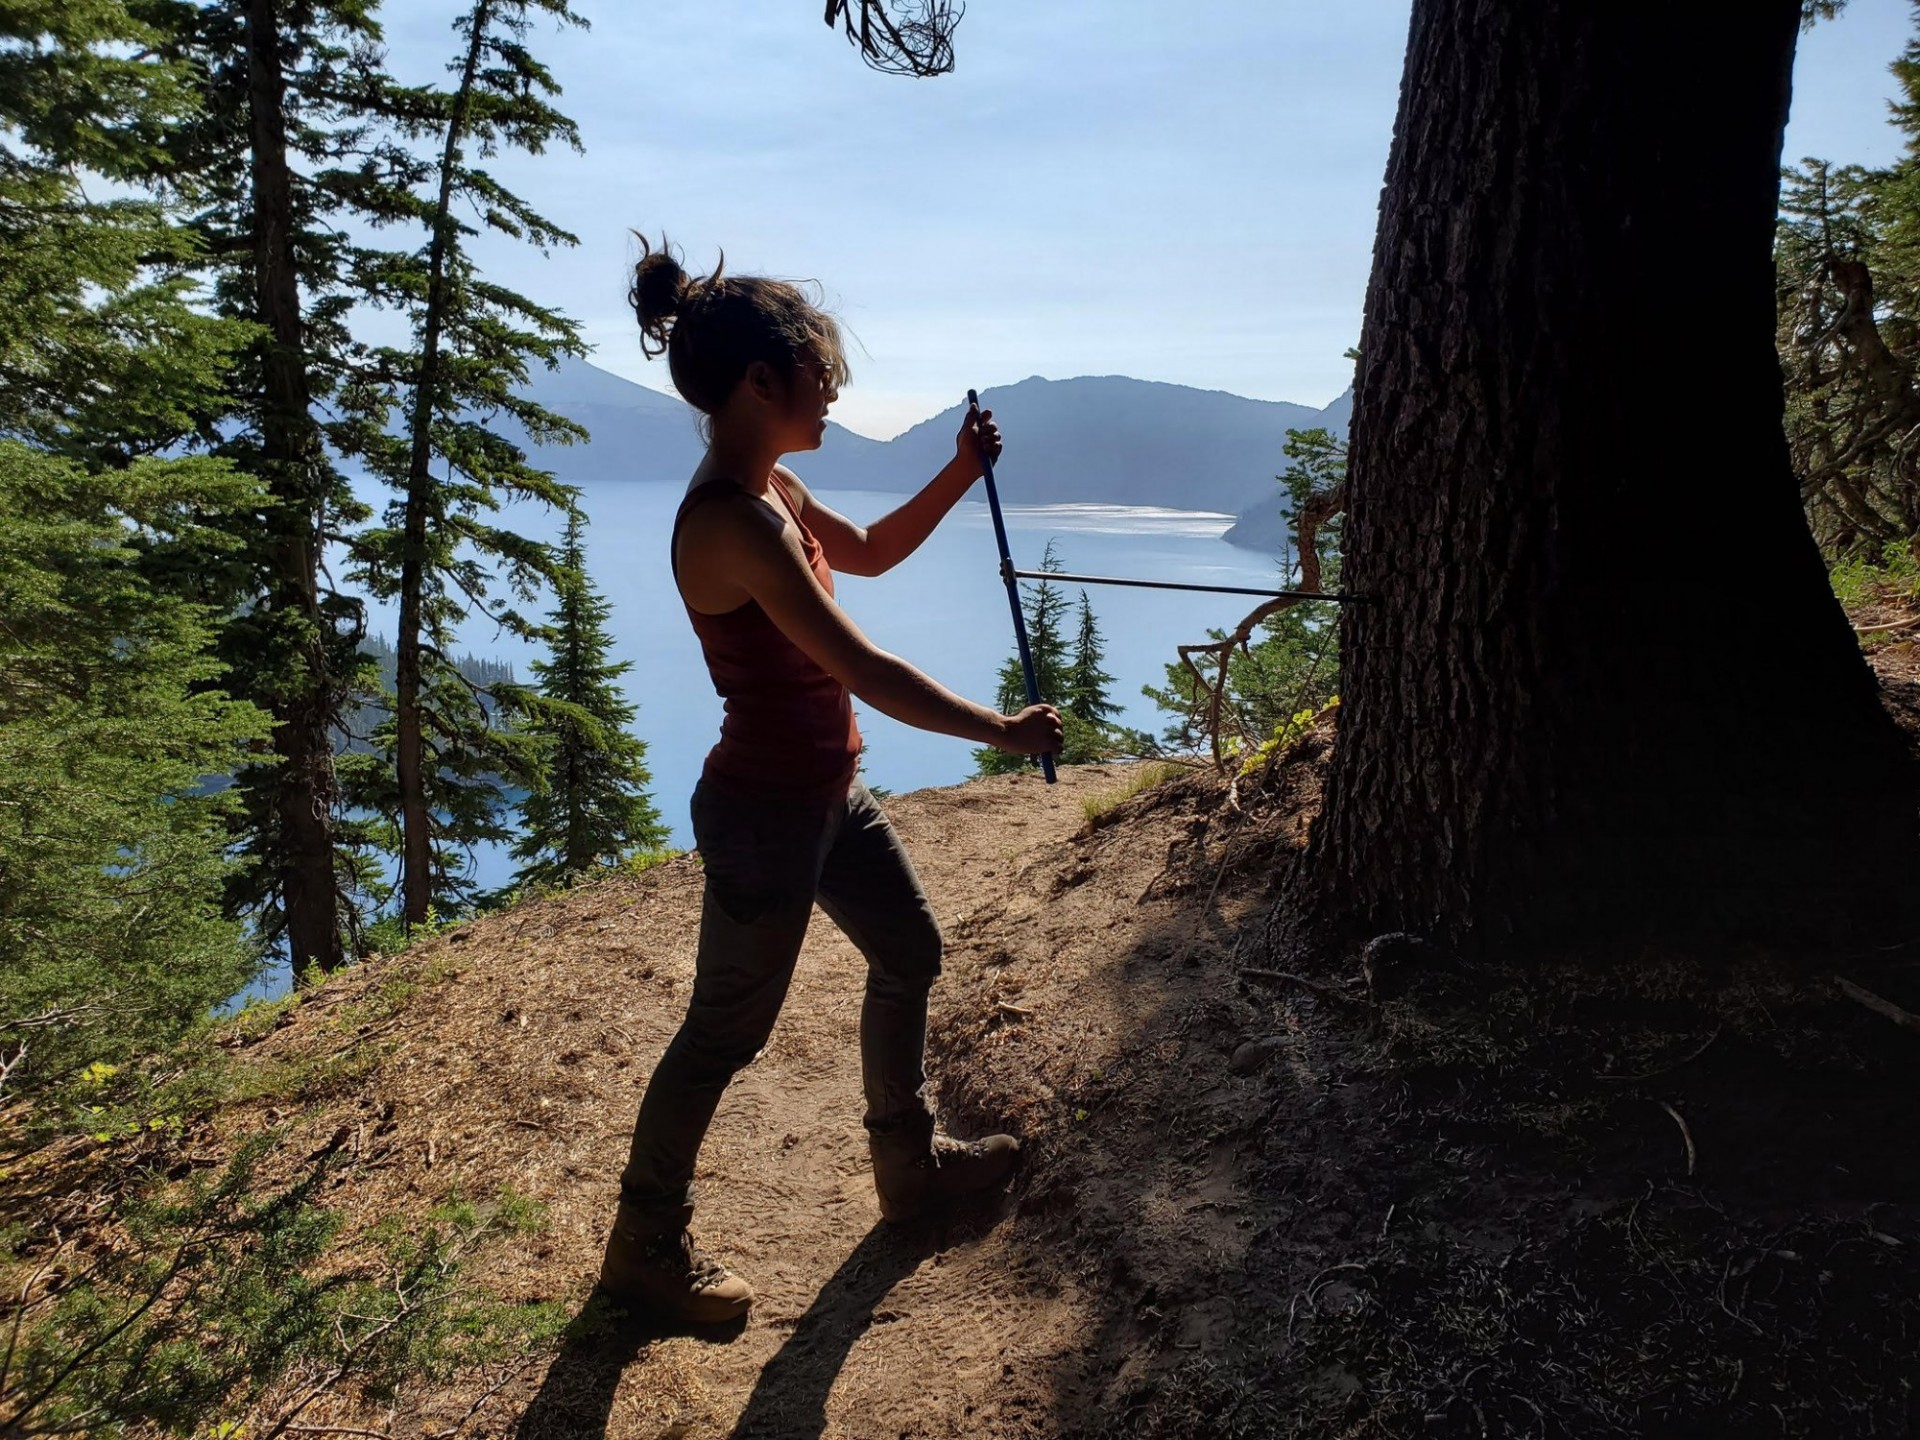 Karen Heeter takes a core sample from an old mountain hemlock near Crater Lake, Oregon, where at least one tree dated to the 1300s. Credit: Grant Harley, University of Idaho